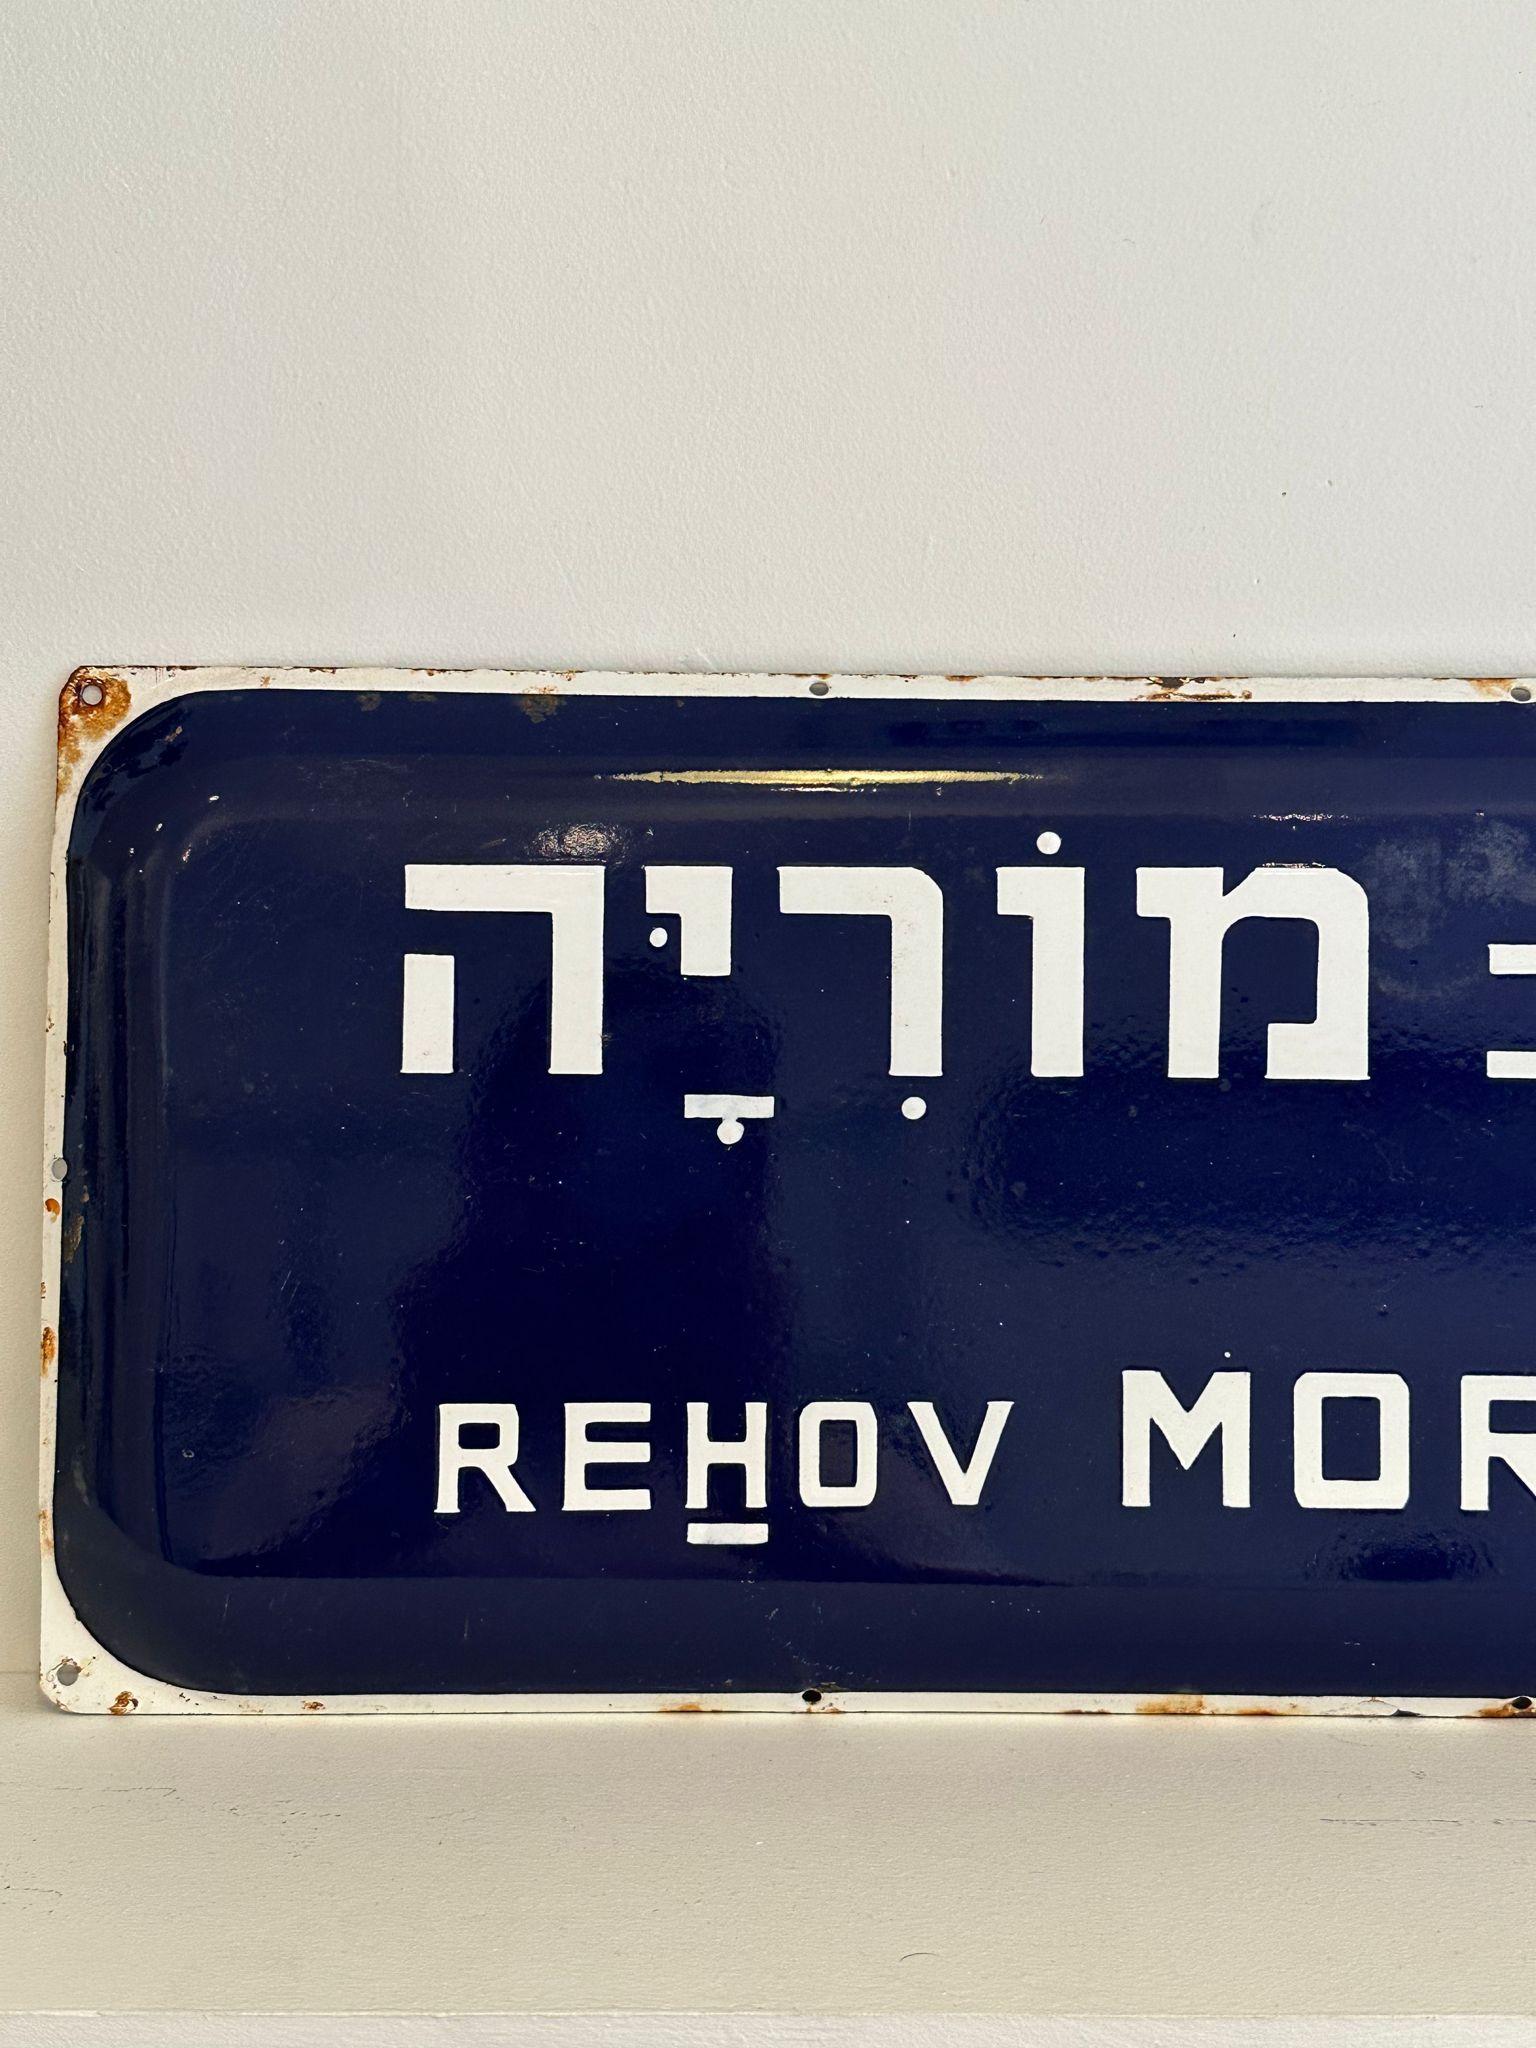 Mid-20th century handmade Israeli street name sign. Made of enamel and iron, this street sign was created shortly after the establishment of the state of Israel in 1948. The sign is written in bolt white letters over a dark blue background, alluding